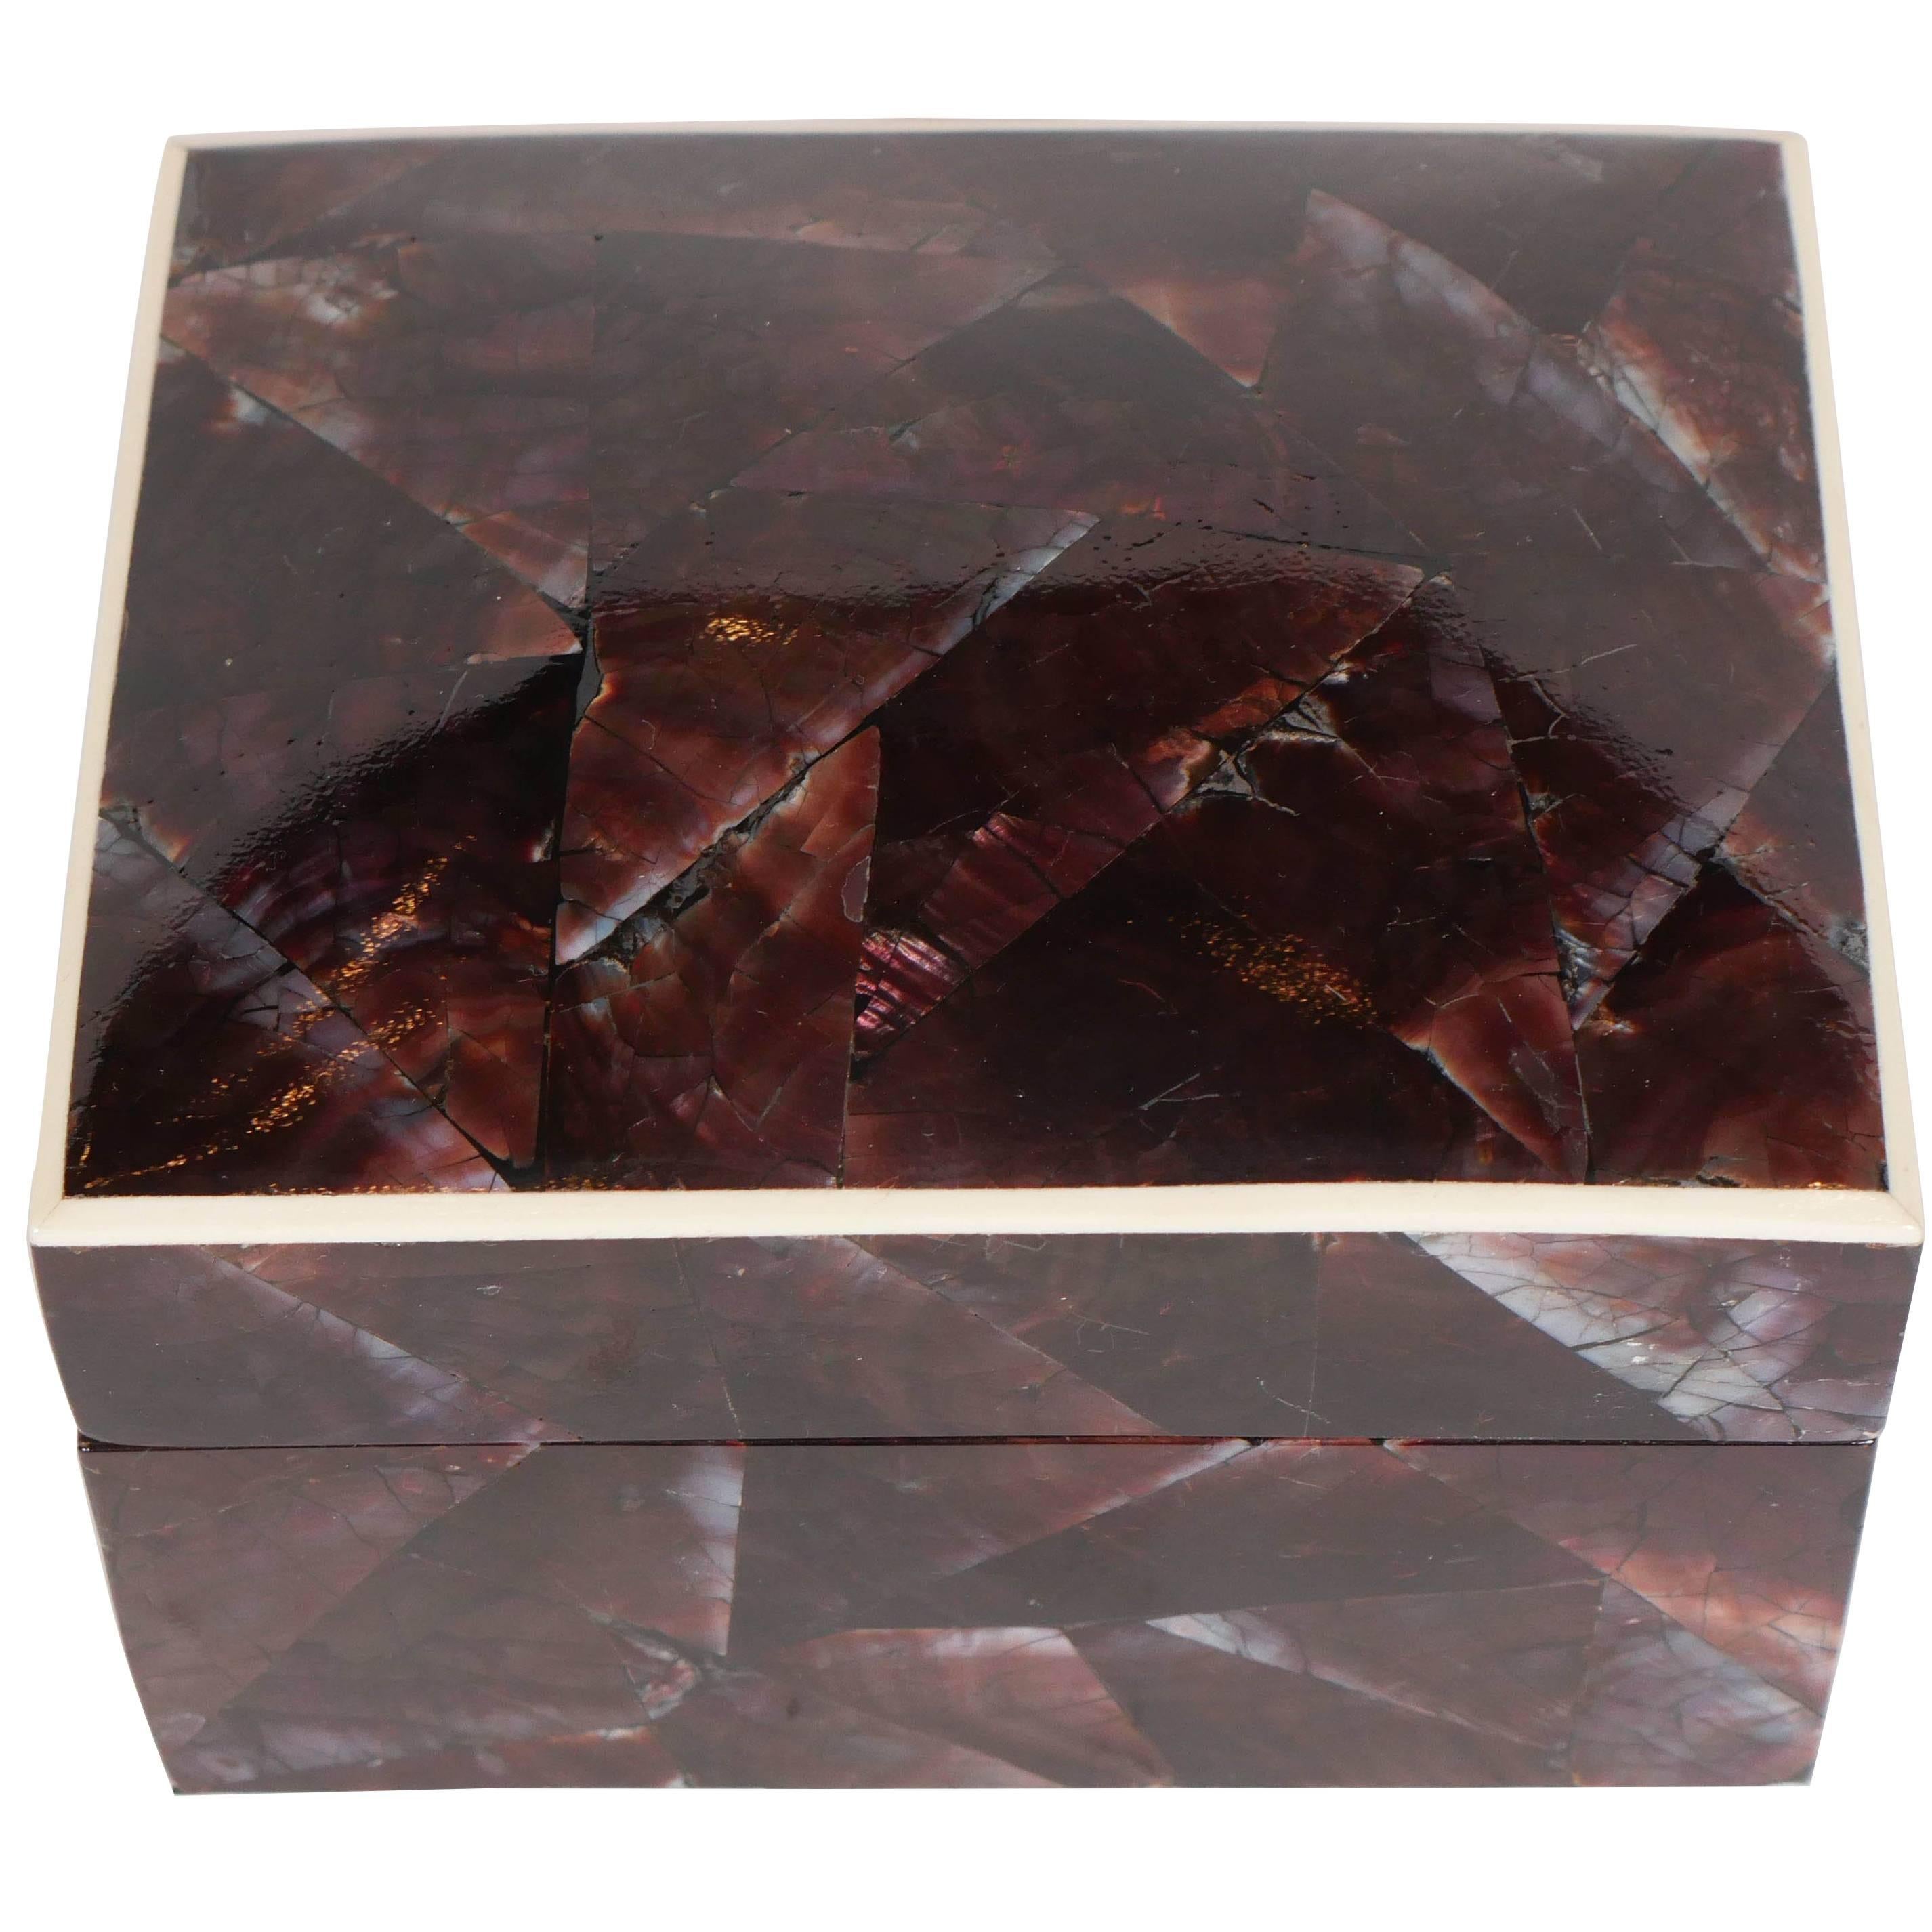 Elegant decorative box or jewelry box comprised of natural pen shell. The luminous iridescent shells have a mosaic pattern in hues of brown and aubergine. Lid features a contrasting exotic bone trim and opens to reveal a palm wood interior. All